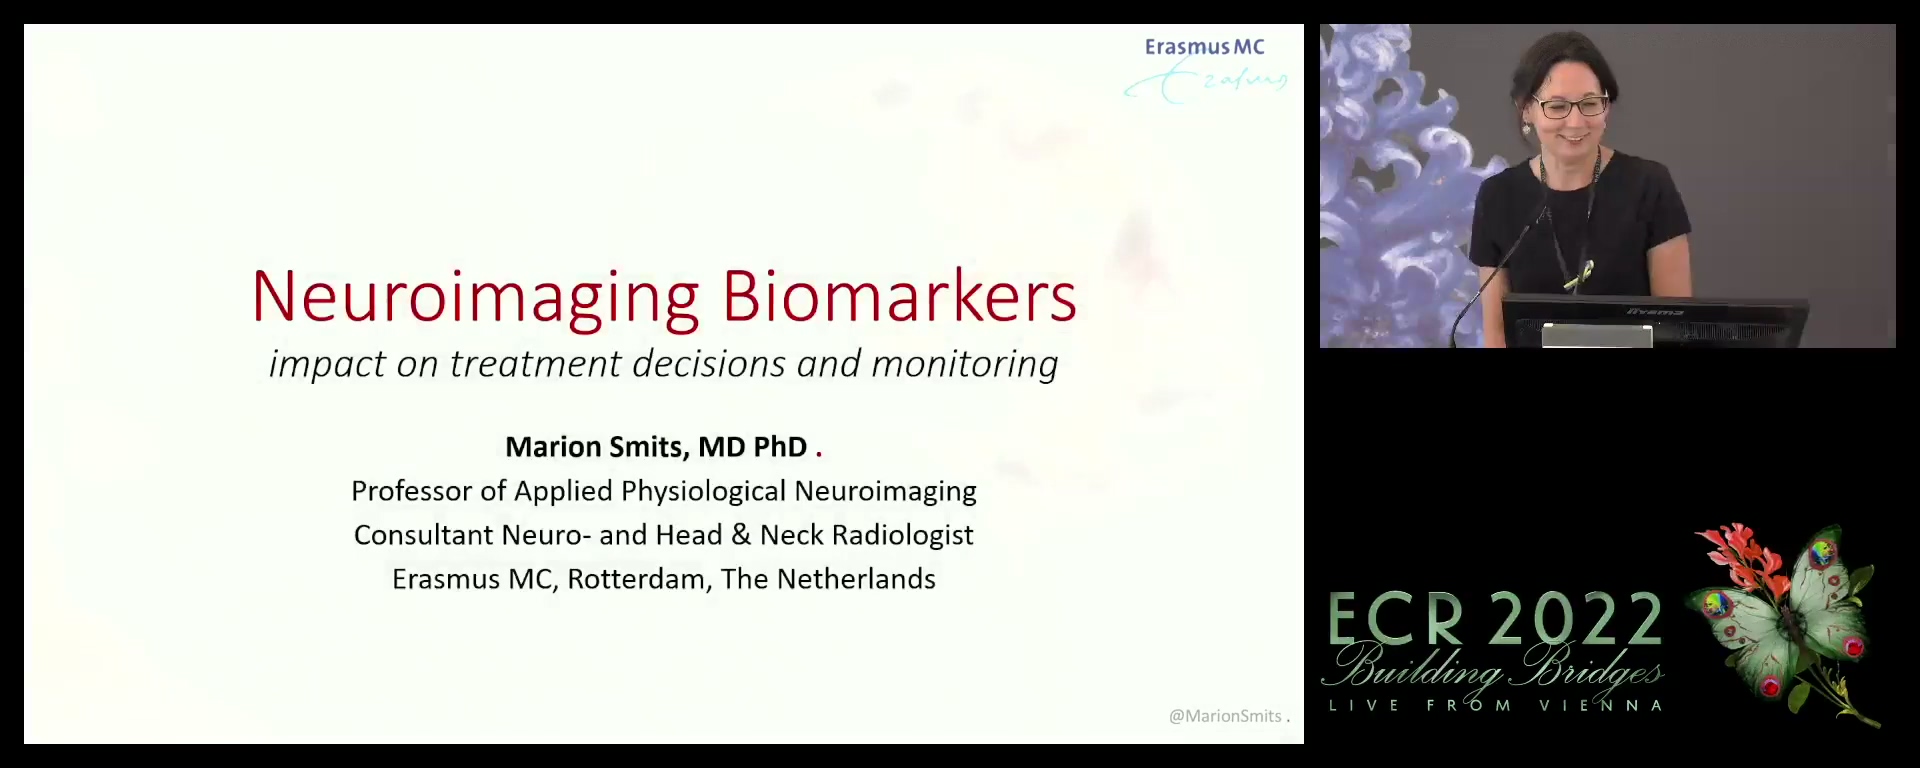 EIBALL's experience with clinical validation of imaging biomarkers